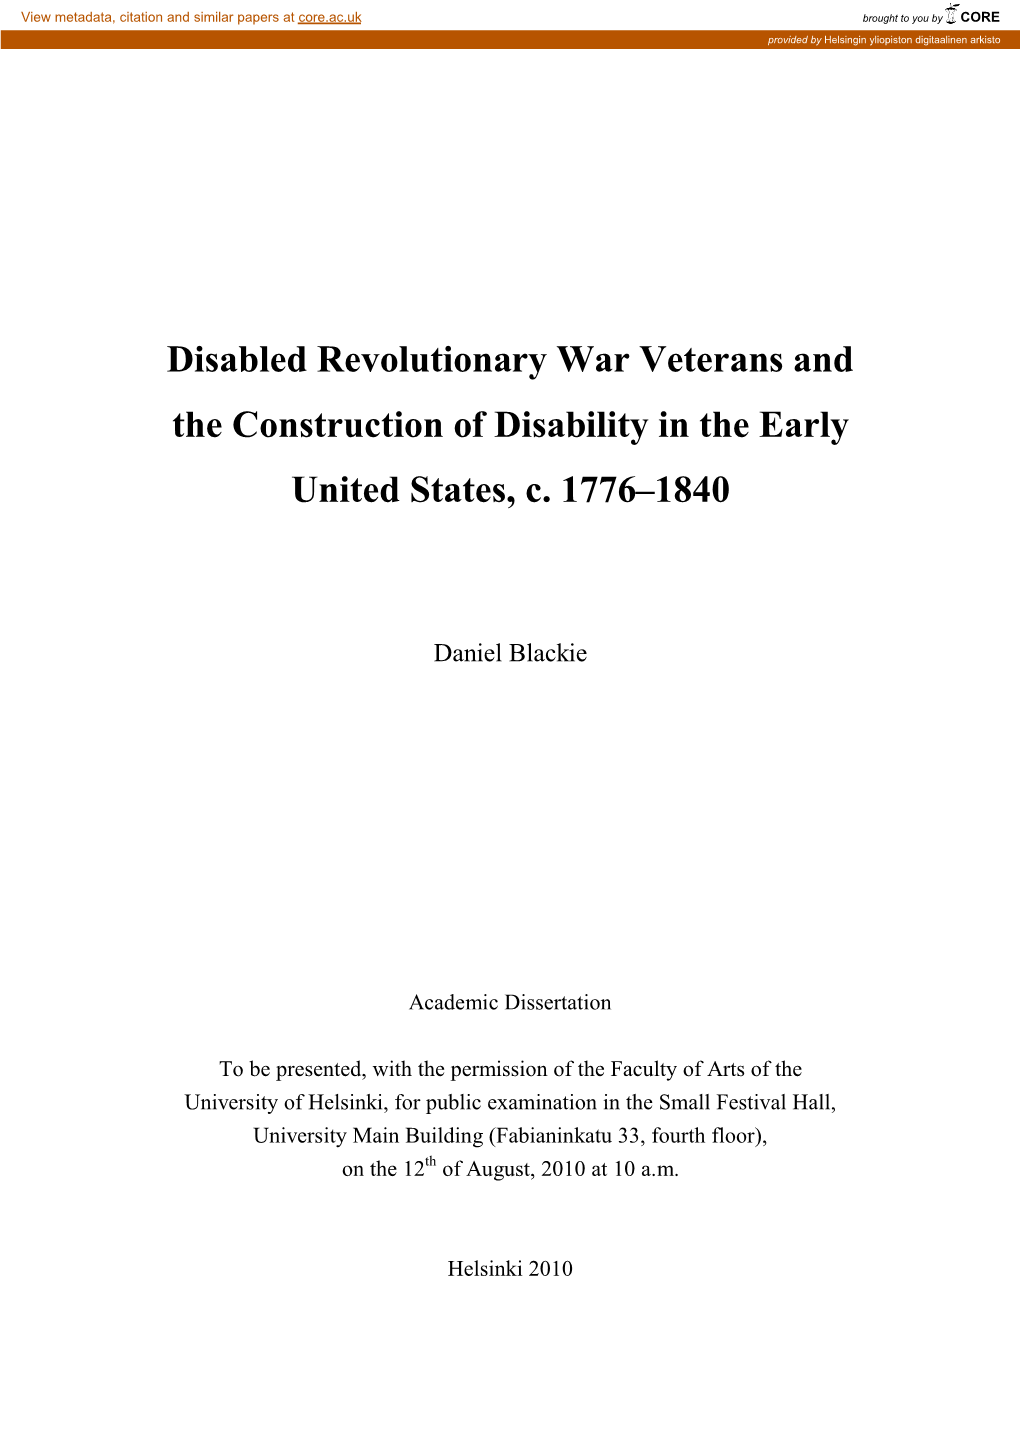 Disabled Revolutionary War Veterans and the Construction of Disability in the Early United States, C